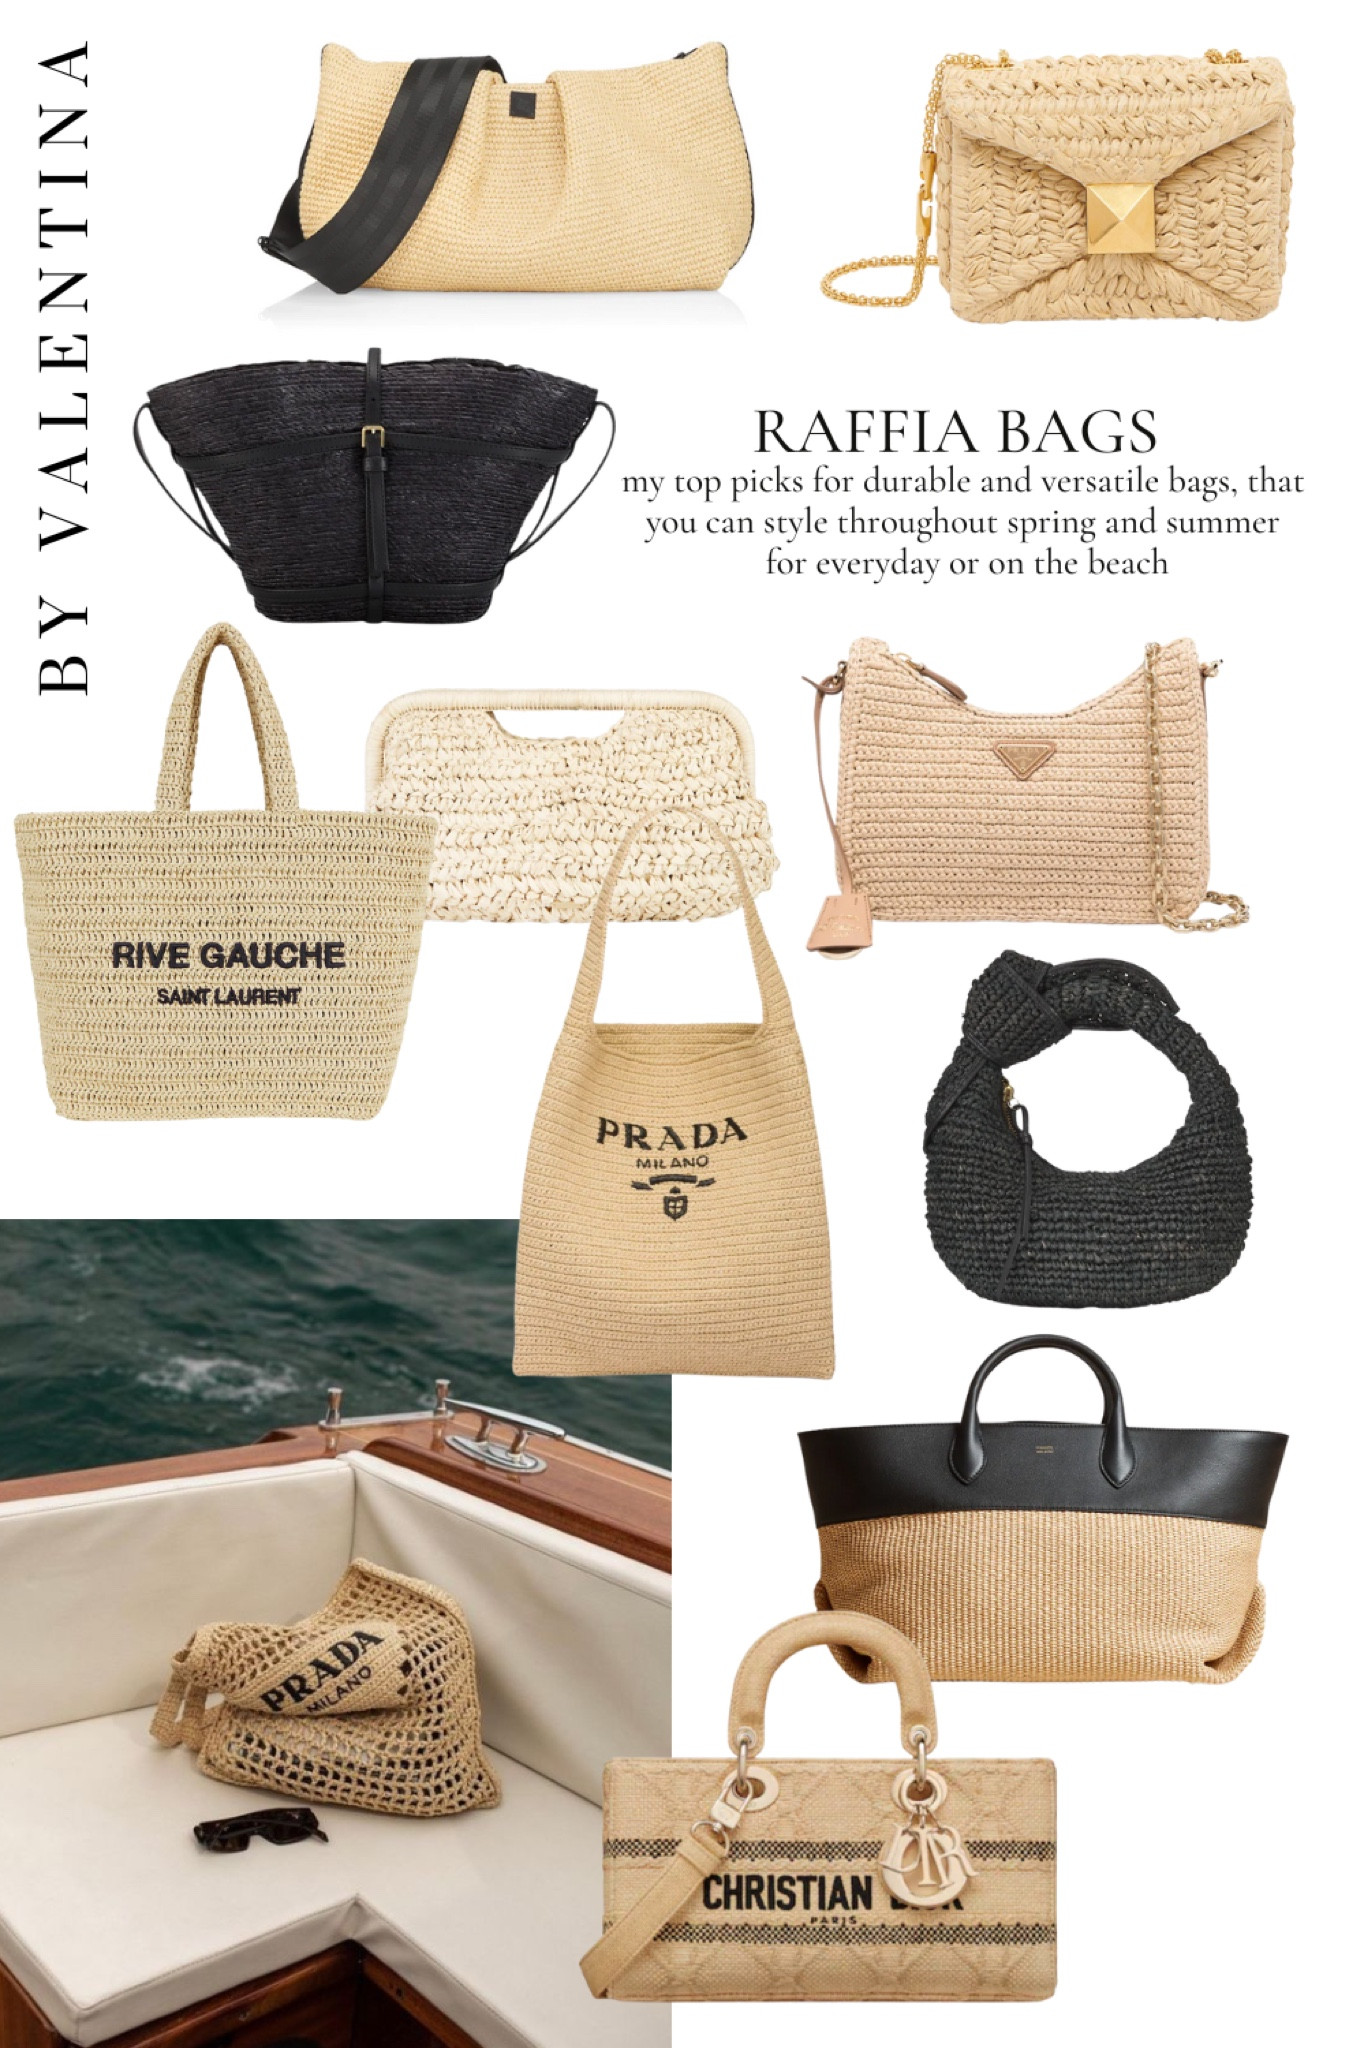 Prada's Raffia Bag Is This Summer's Most Sought-After Item